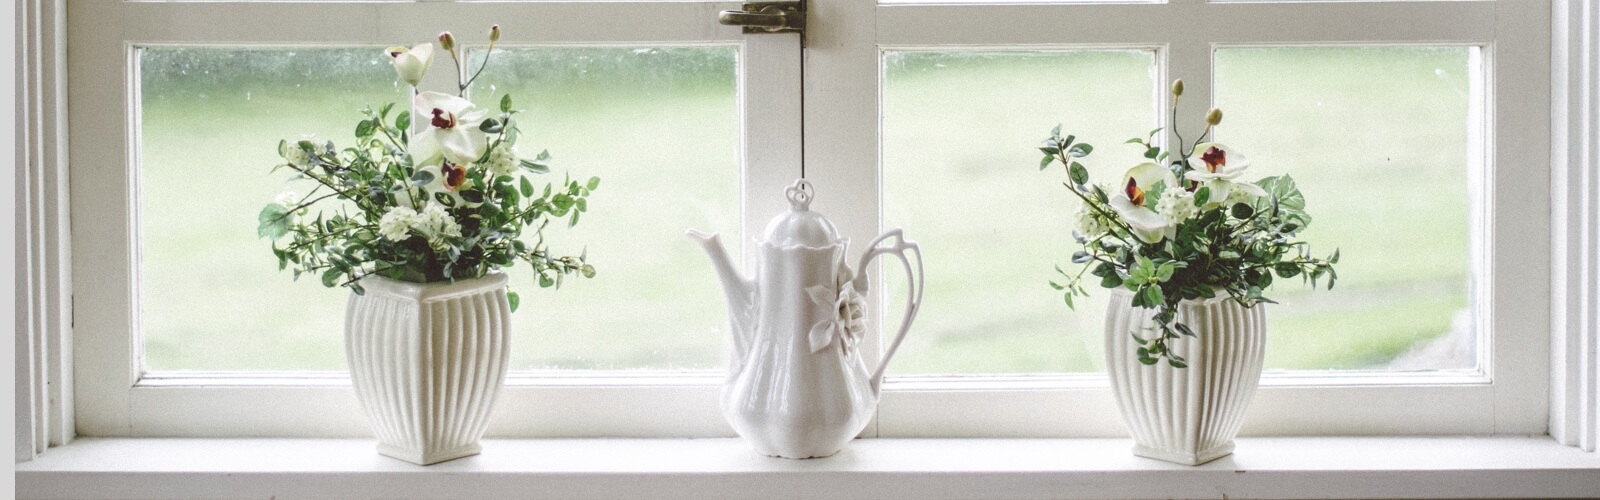 two white vases and a white tea pot on a white window sill overlooking a lawn